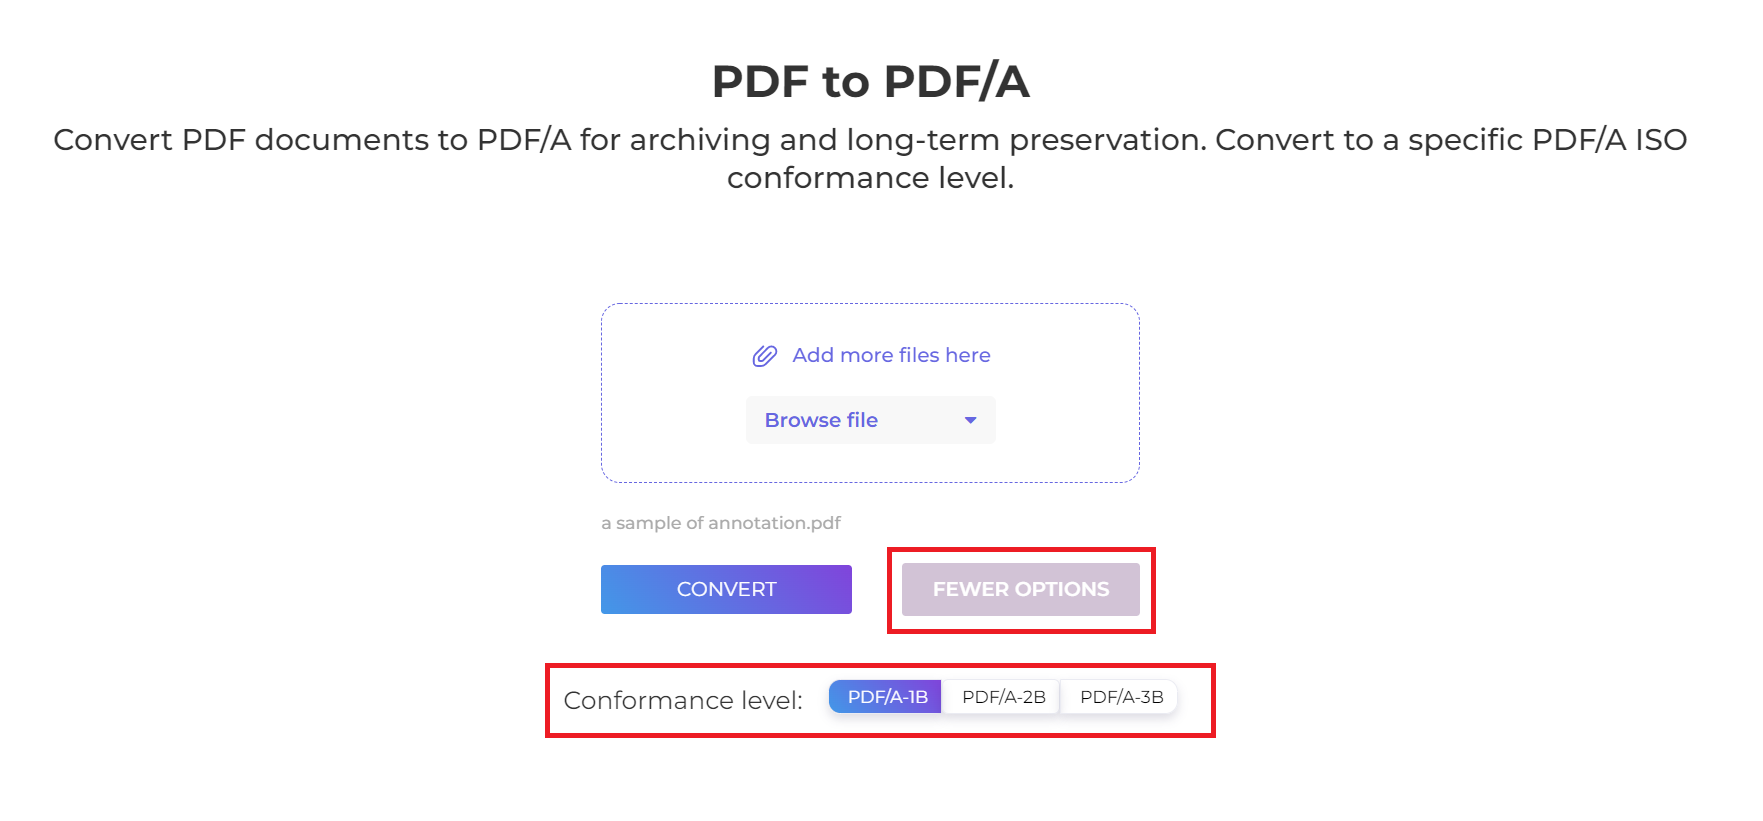 PDF/a-1 subset options for archiving